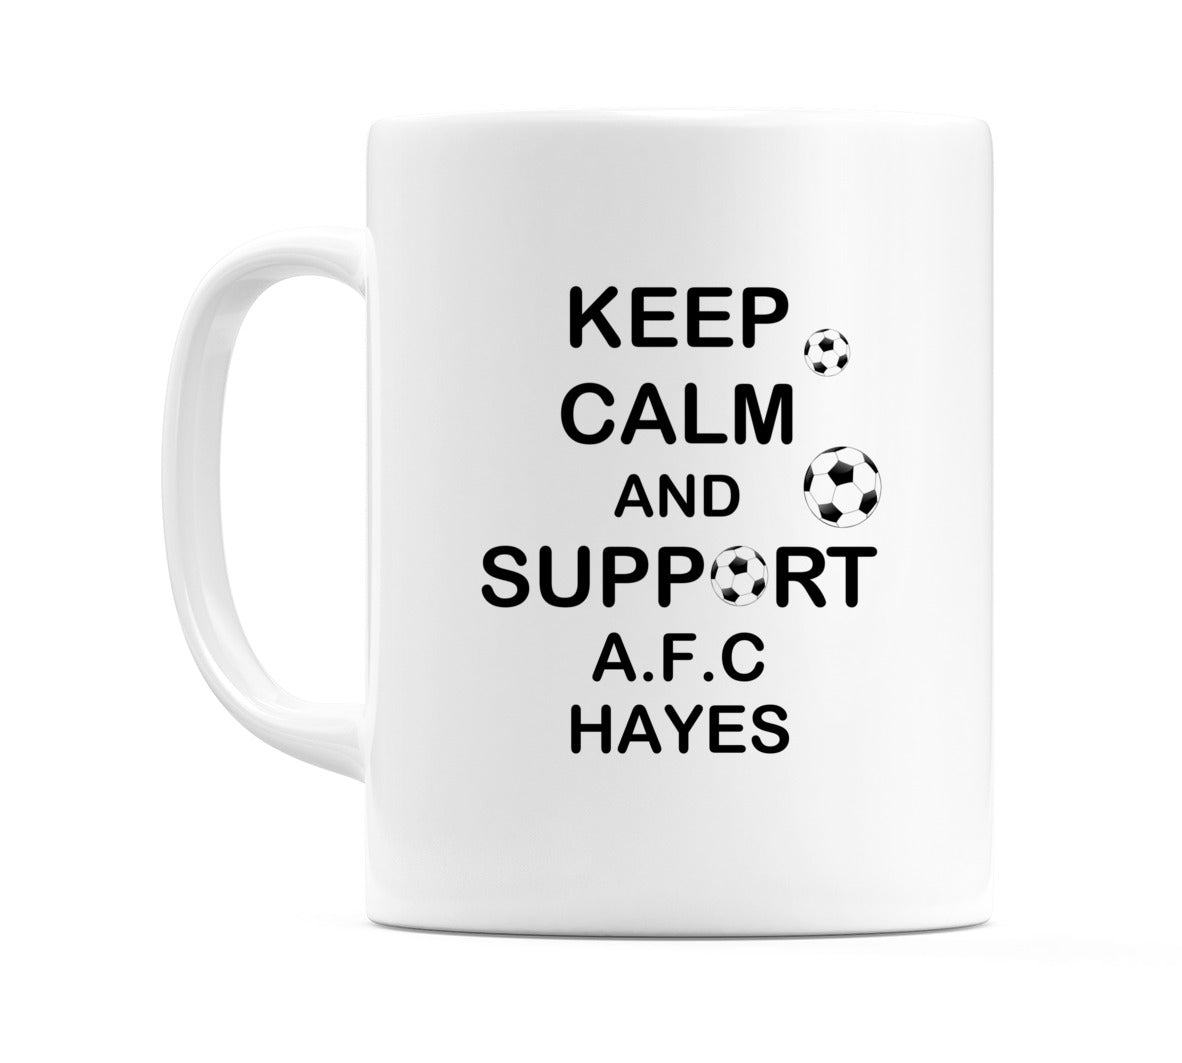 Keep Calm And Support A.F.C. Hayes Mug